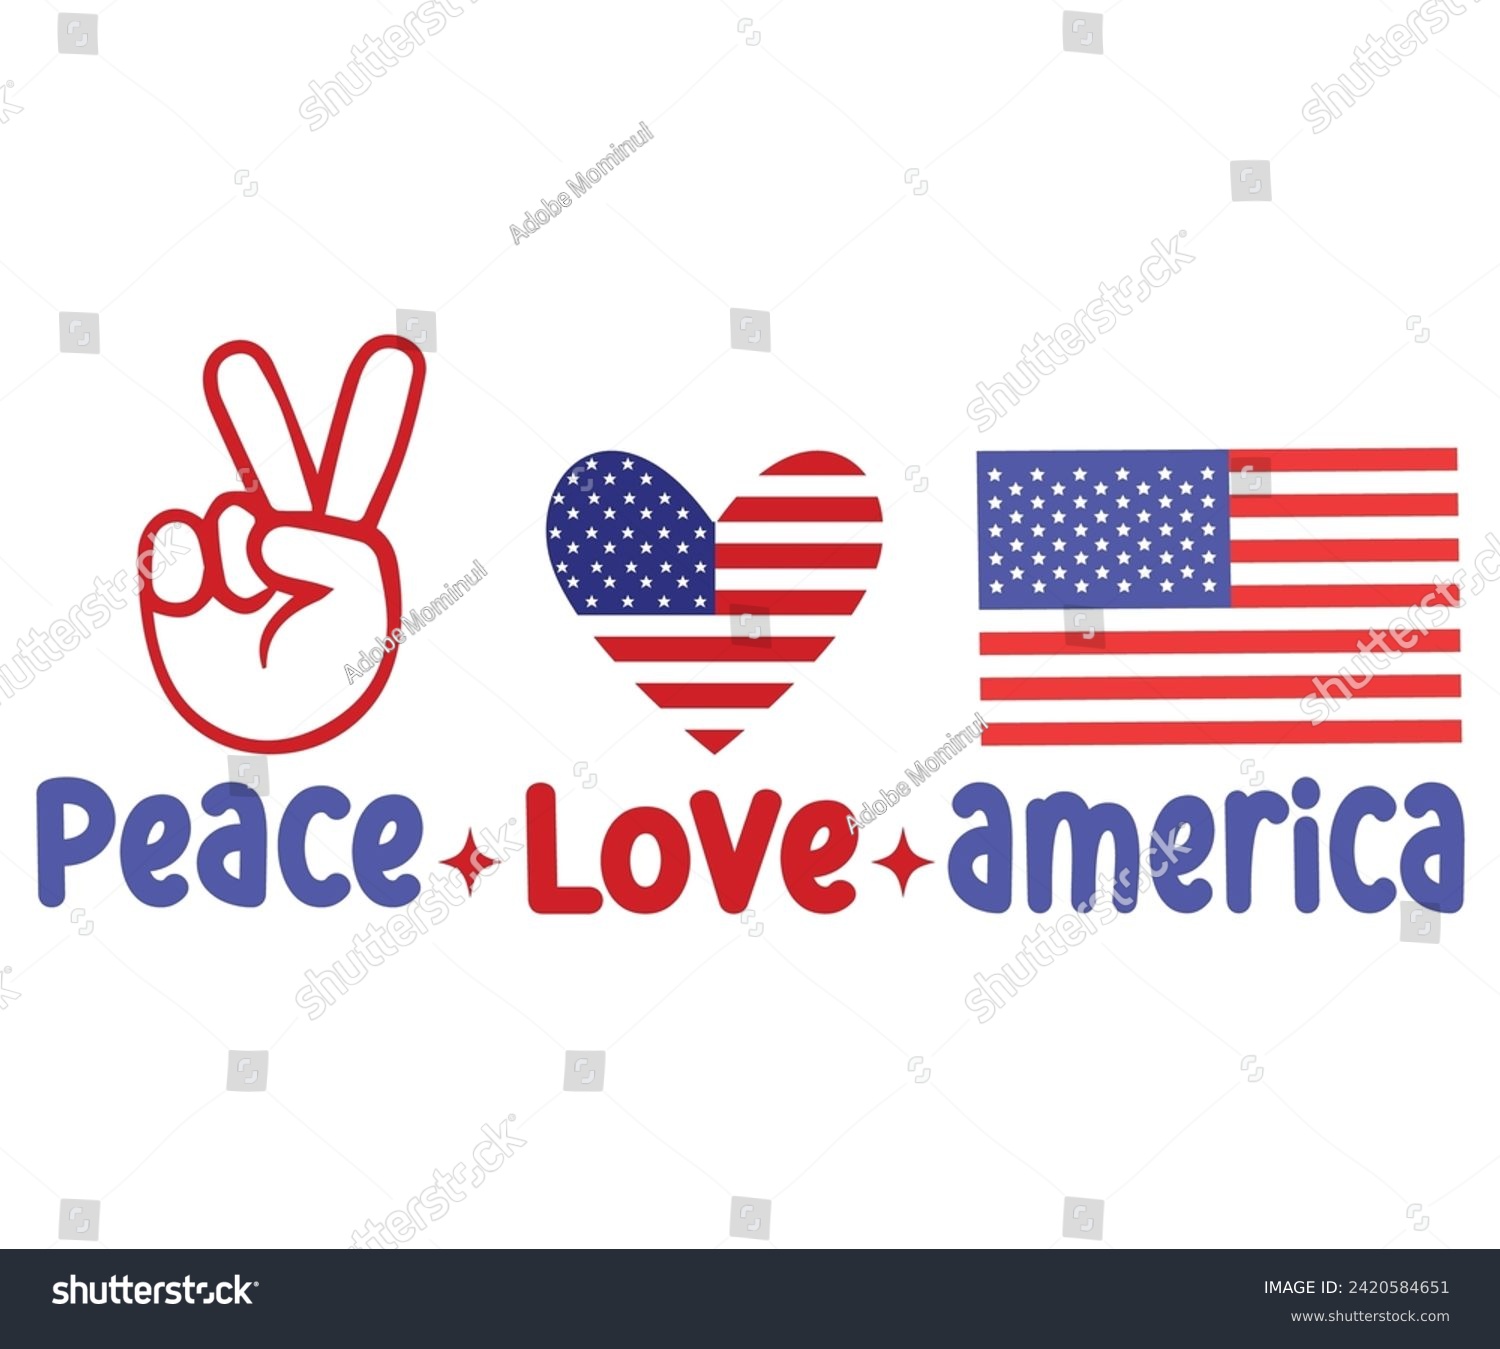 SVG of Peace Love America Svg,Independence Day,Patriot Svg,4th of July Svg,America Svg,USA Flag Svg,4th of July Quotes, Freedom Shirt,Memorial Day,Svg Cut Files,USA T-shirt,American Flag, svg